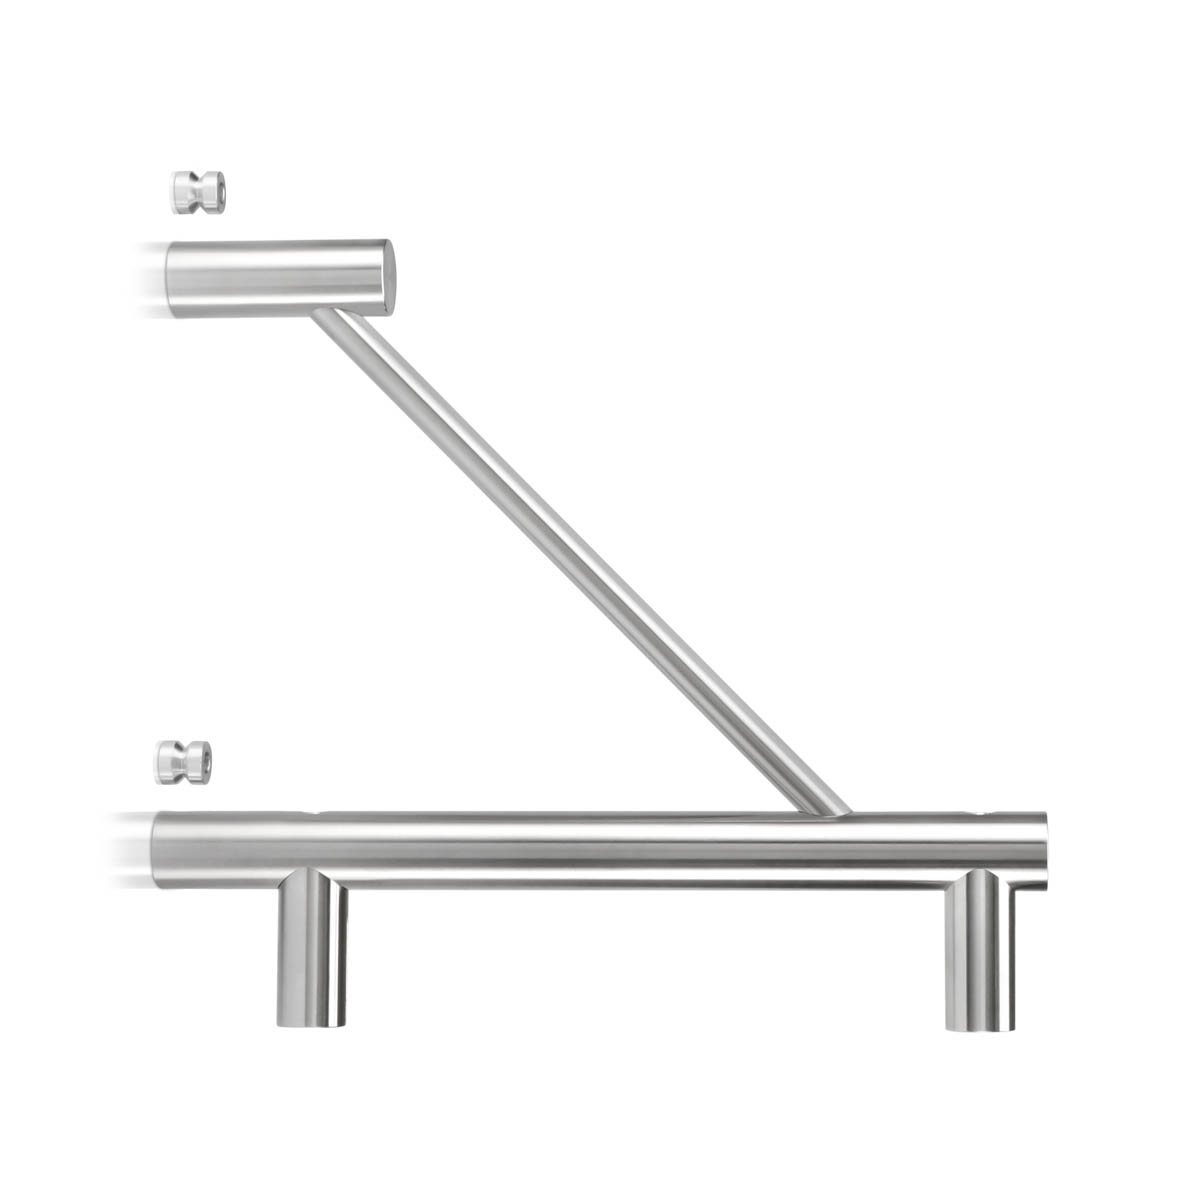 Aluminum Flag Sign Bracket Only, Stainless Steel Satin Brushed Finish. 1/4'' Thickness Material Accepted, 7-7/8 Length, 3/4'' Diameter. (Sold Without Panel, Bracket Only)